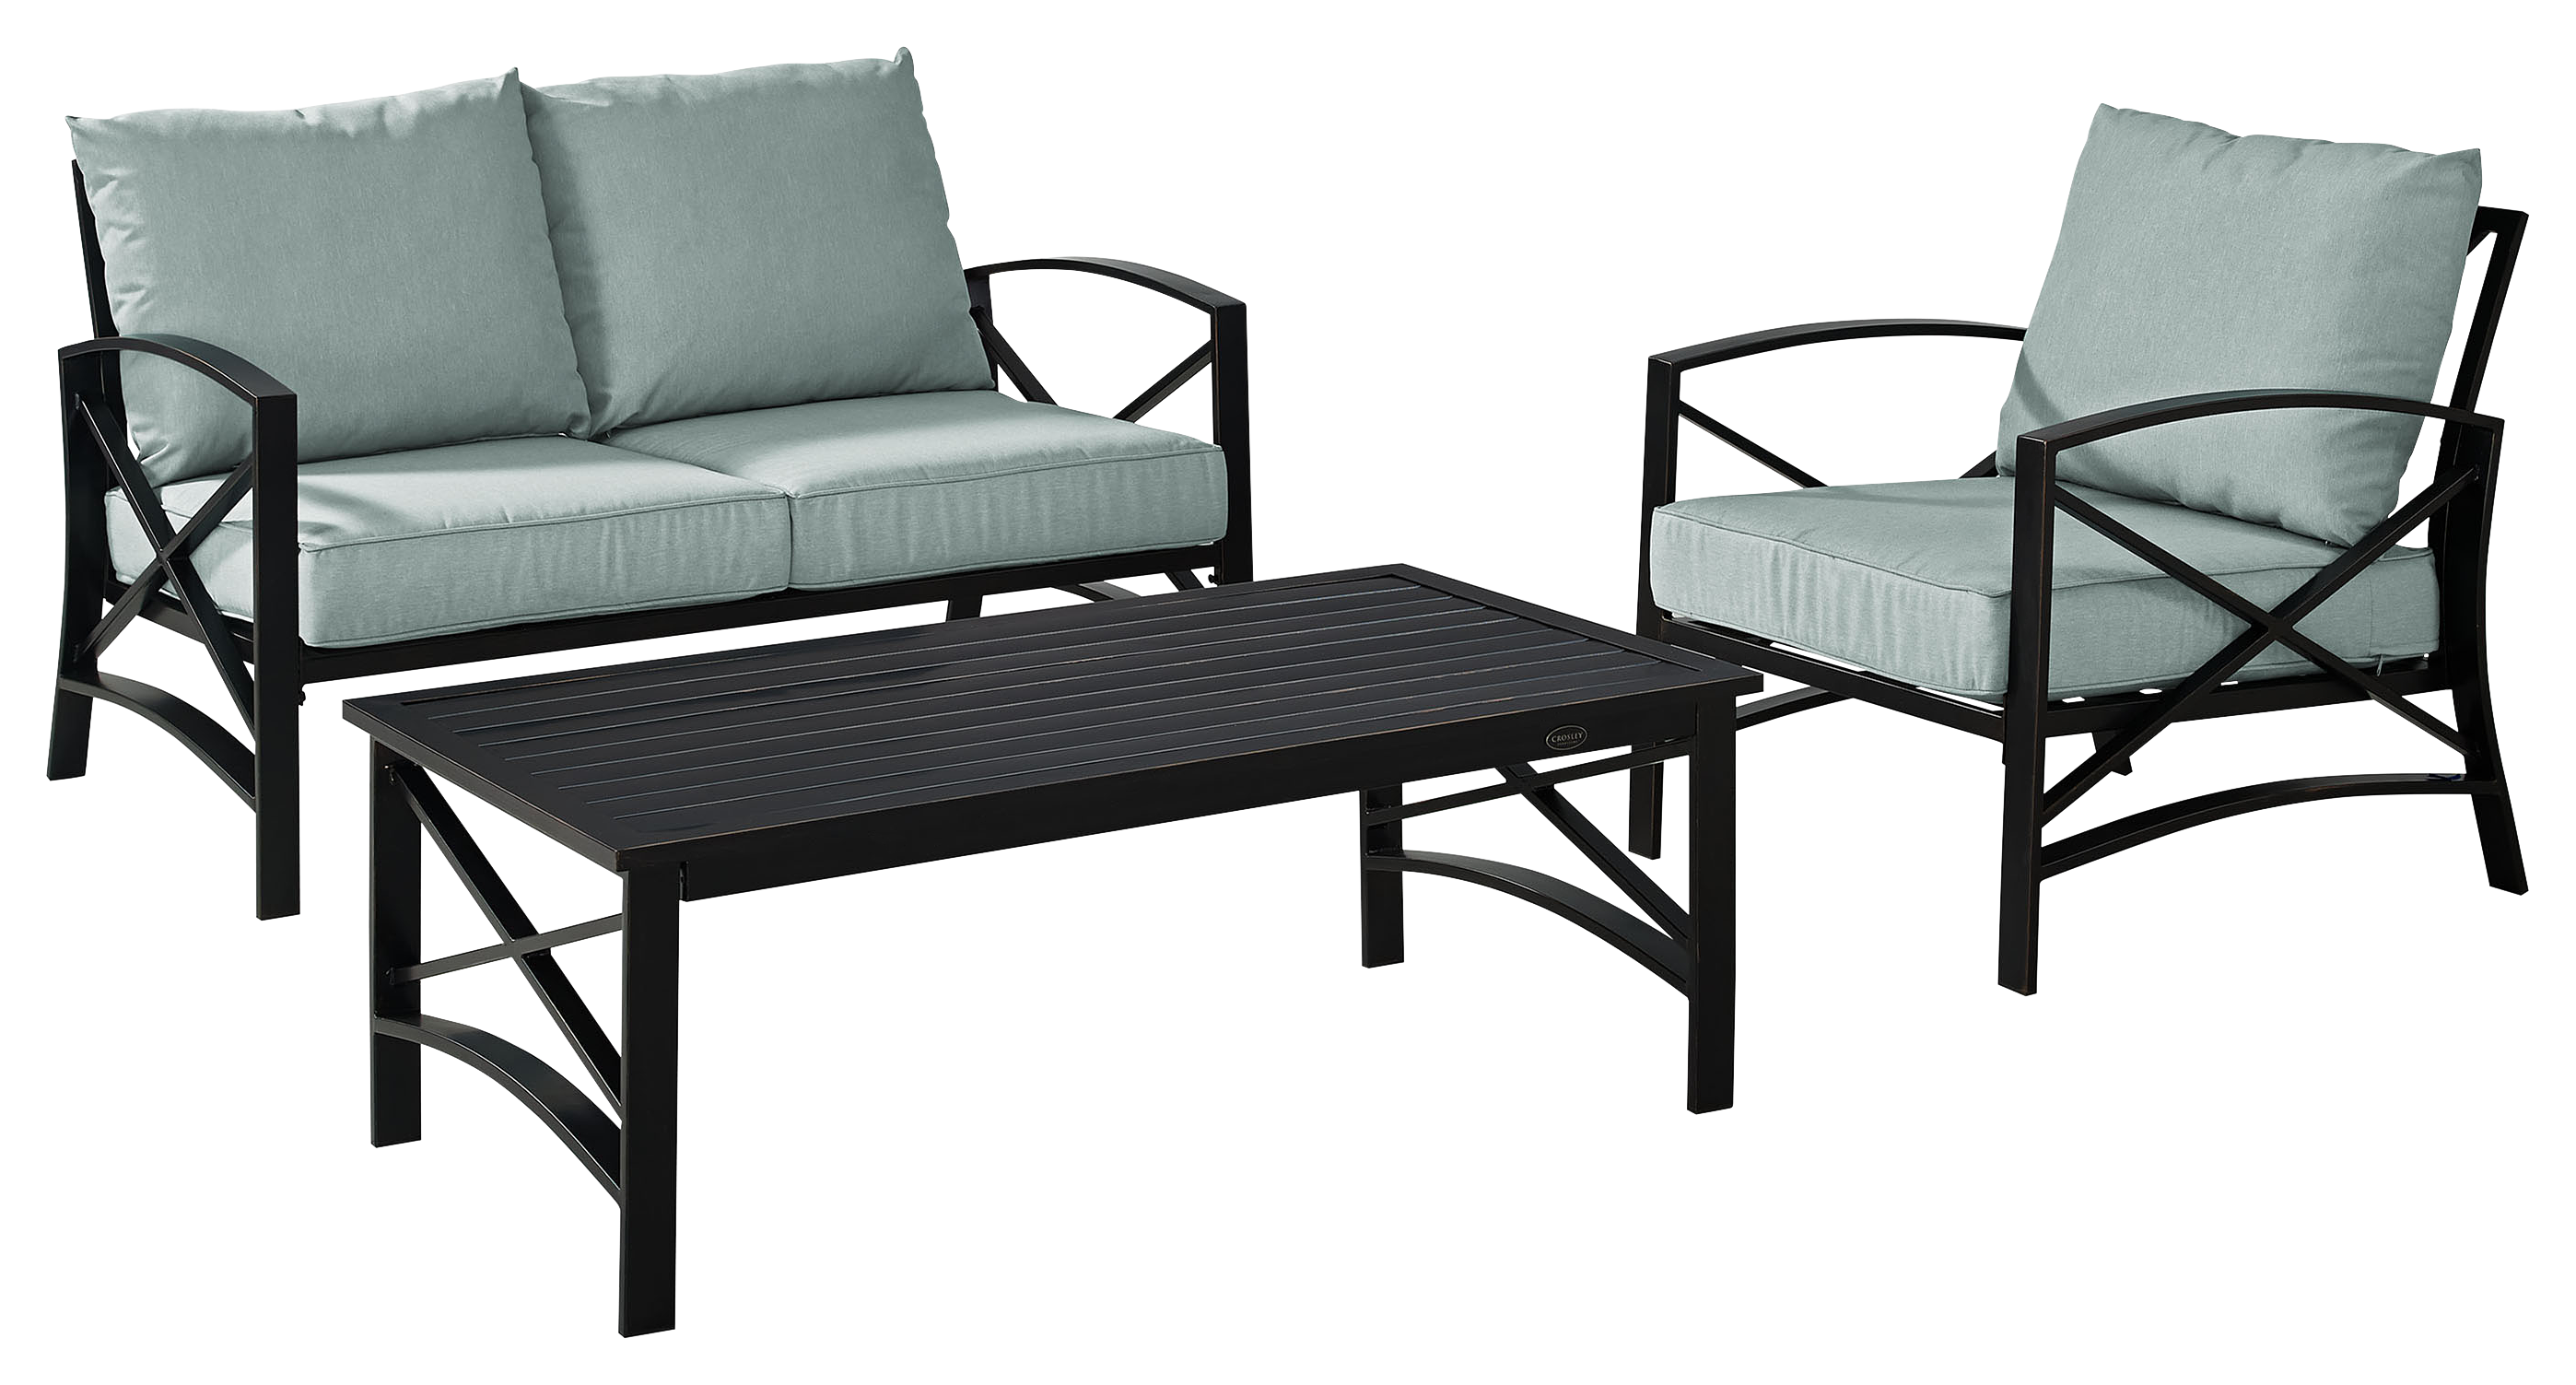 Crosley Kaplan Loveseat, Armchair, And Coffee Table 3 Piece Outdoor Metal Patio Furniture Set Mist/oil Rubbed Bronze